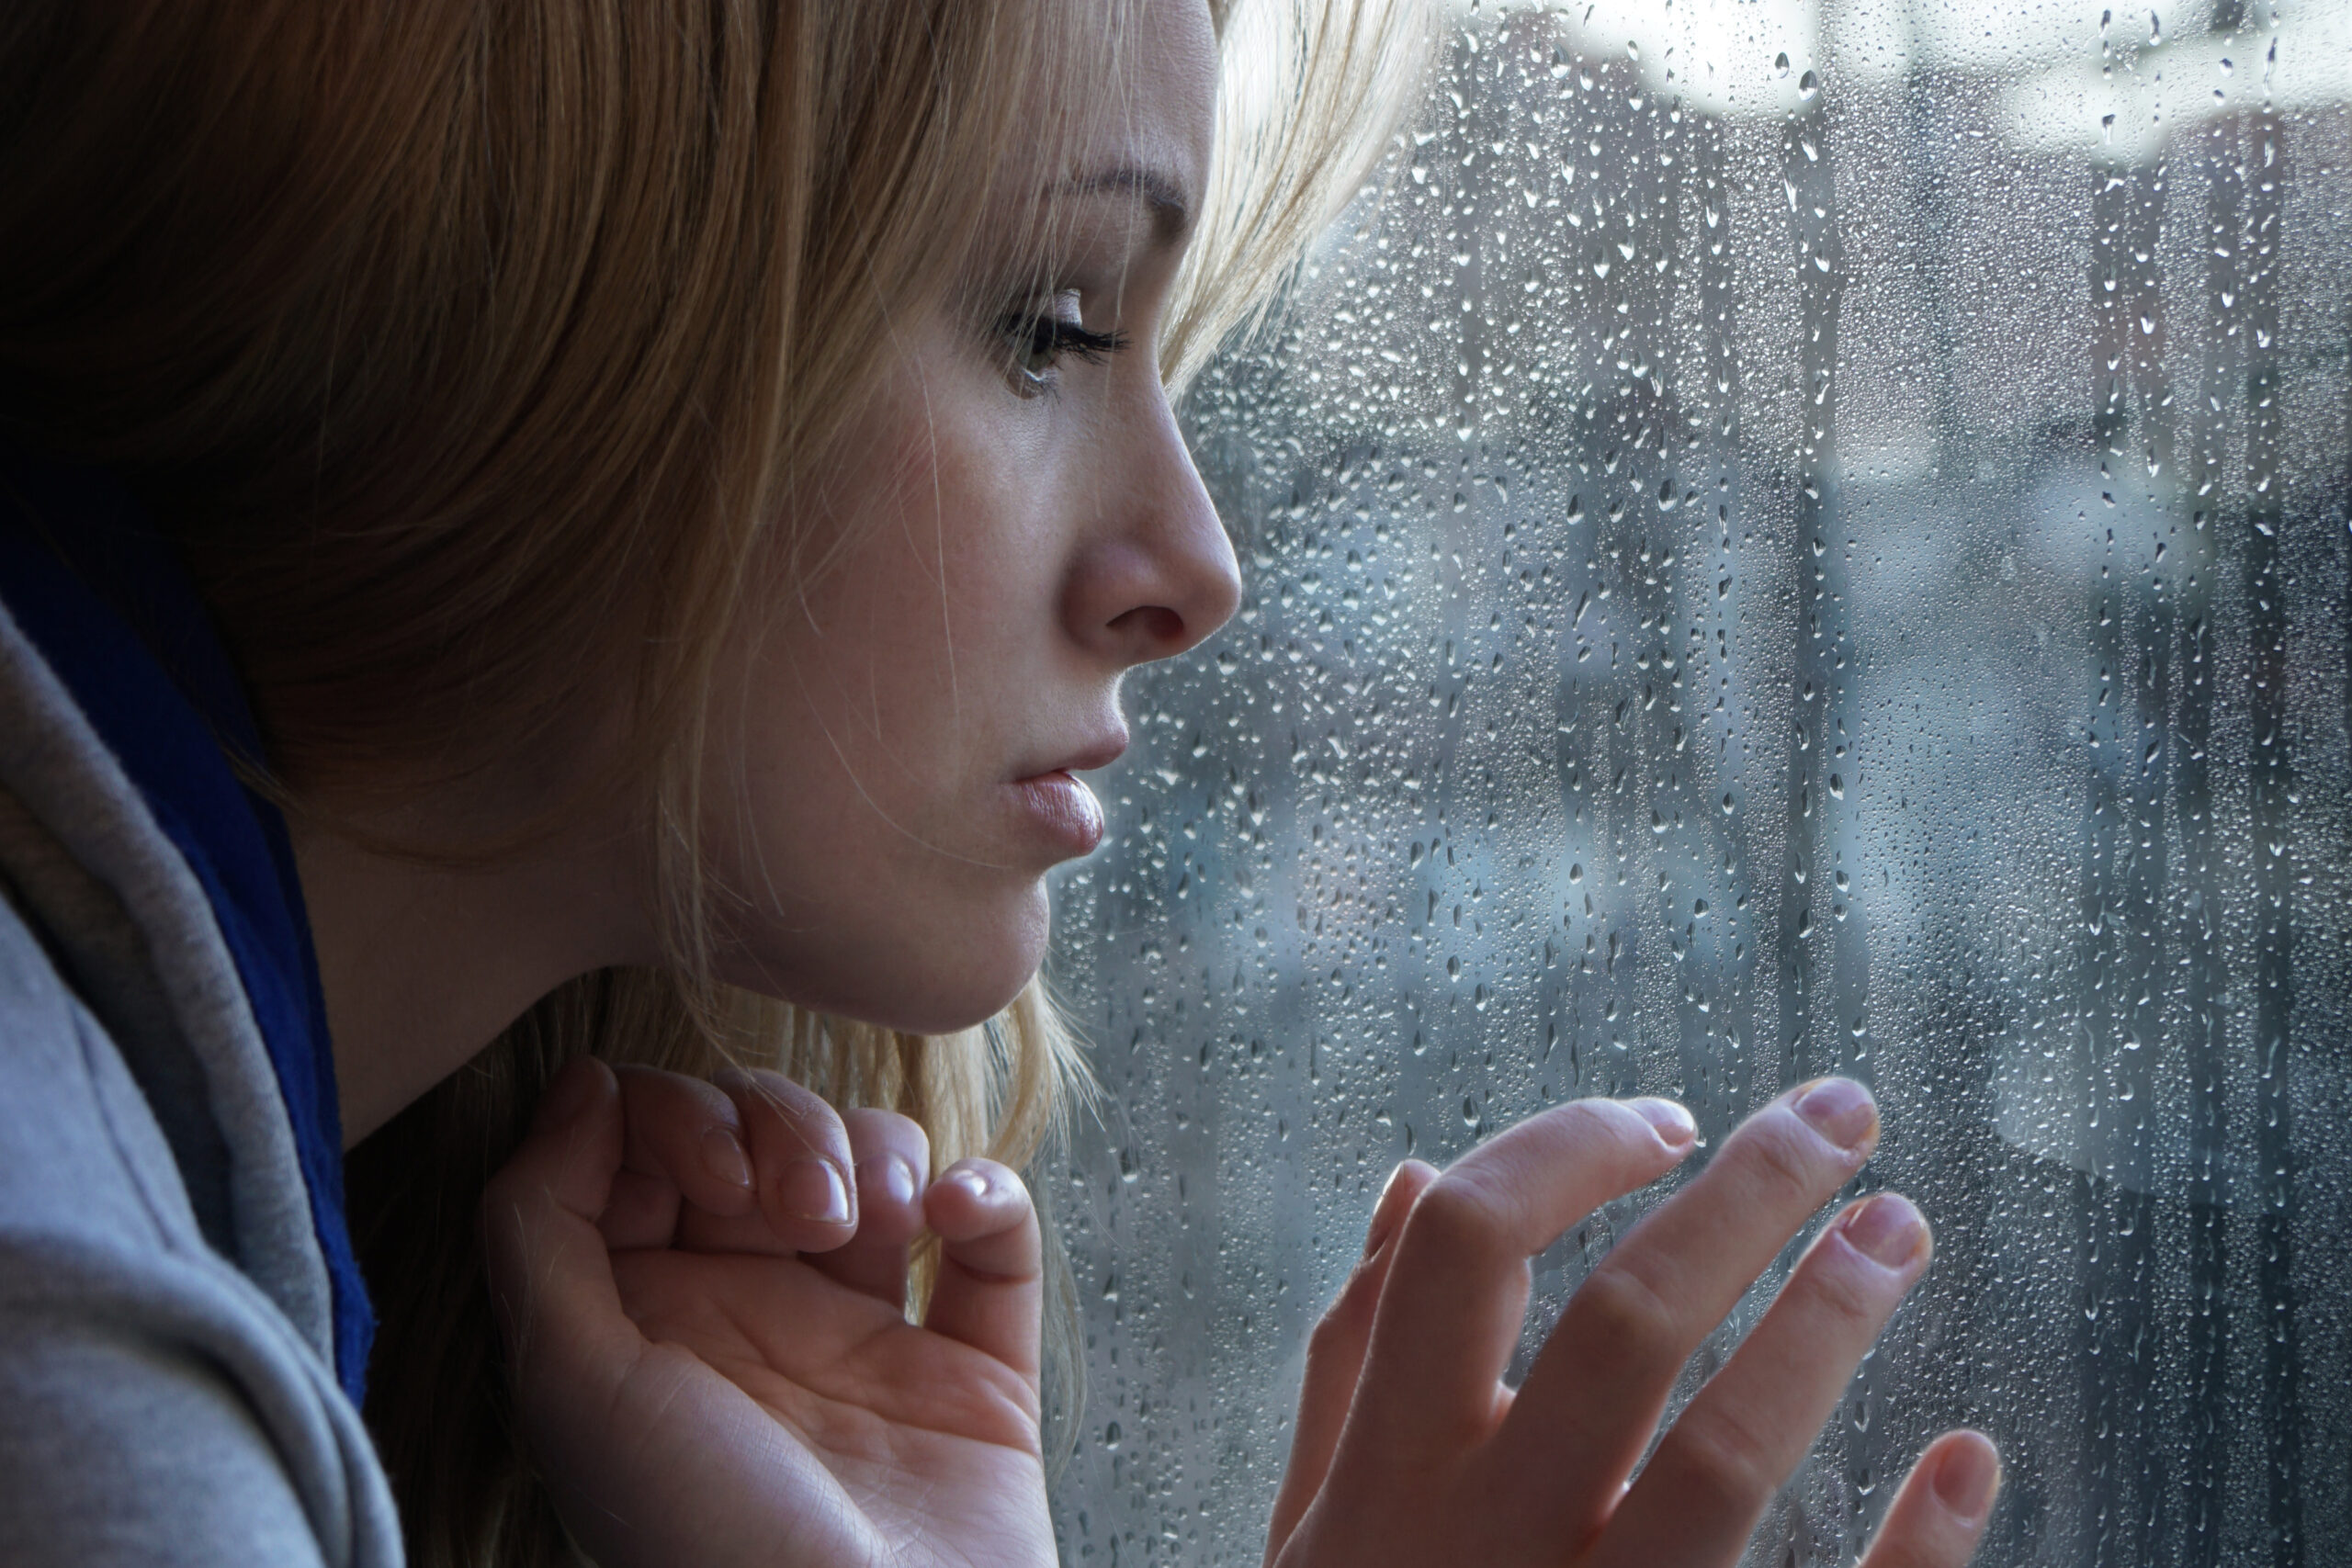 Sad young person looking out of window on rainy day